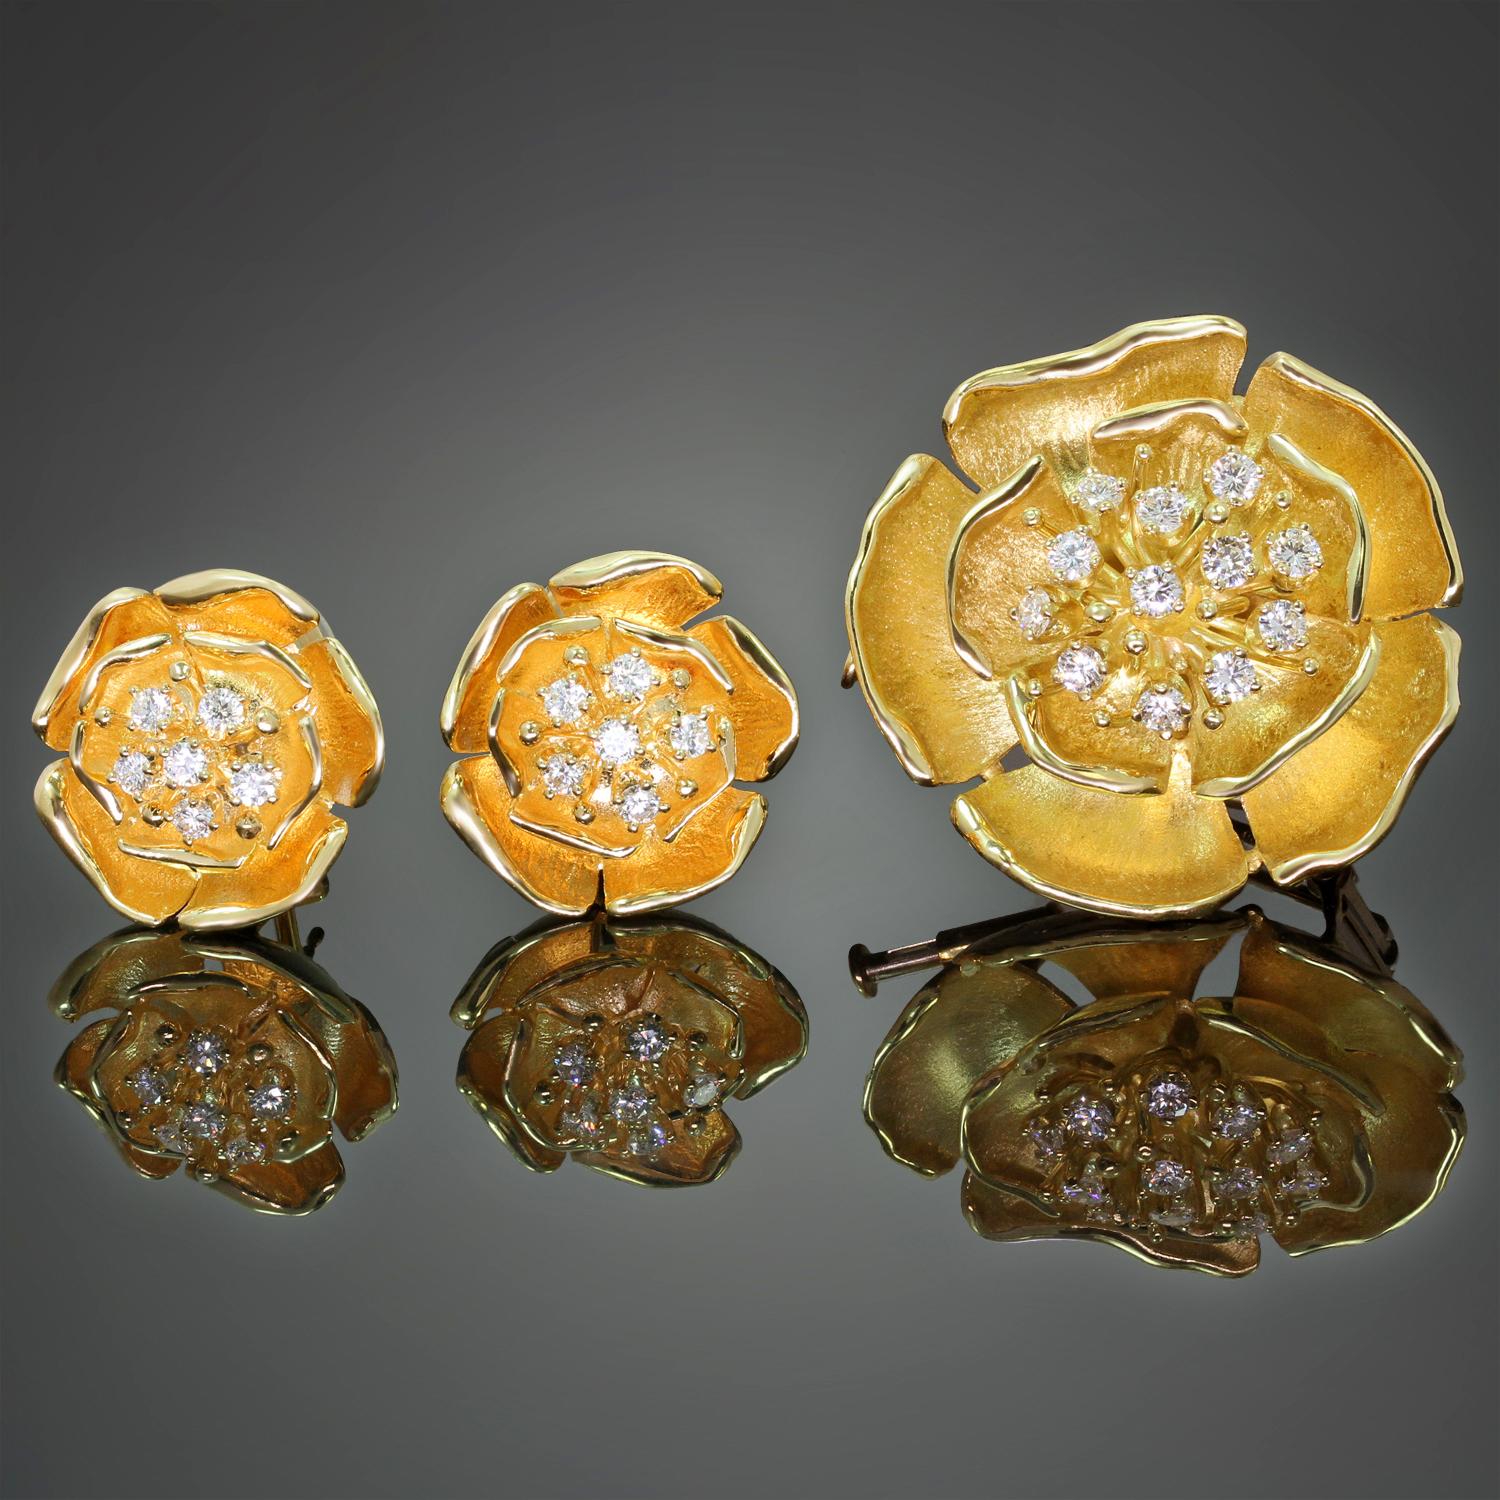 This exquisite Piaget earrings and brooch set features an elegant design of sparkling flowers crafted in 18k yellow gold and set with brililant-cut round F-G VVS1-VVS2 diamonds. The brooch can be worn as a pendant. Made in Switzerland circa 1990s.